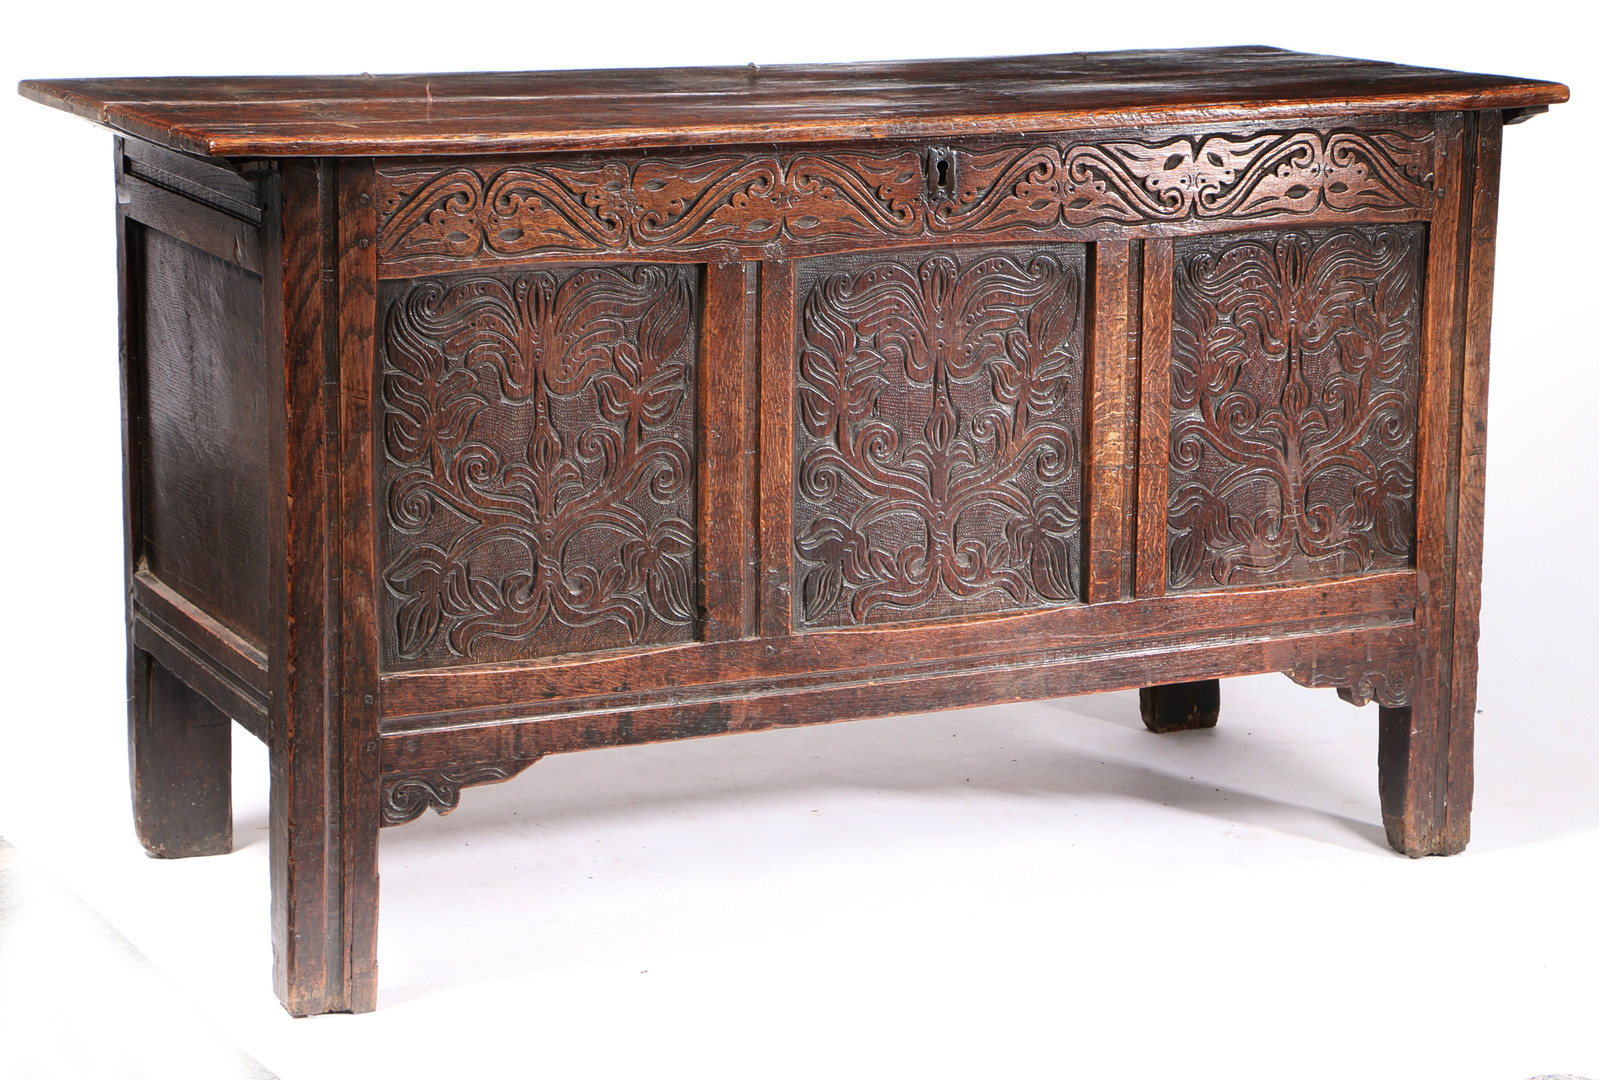 A CHARLES II OAK COFFER, WEST COUNTRY. CIRCA 1670. - Image 4 of 4